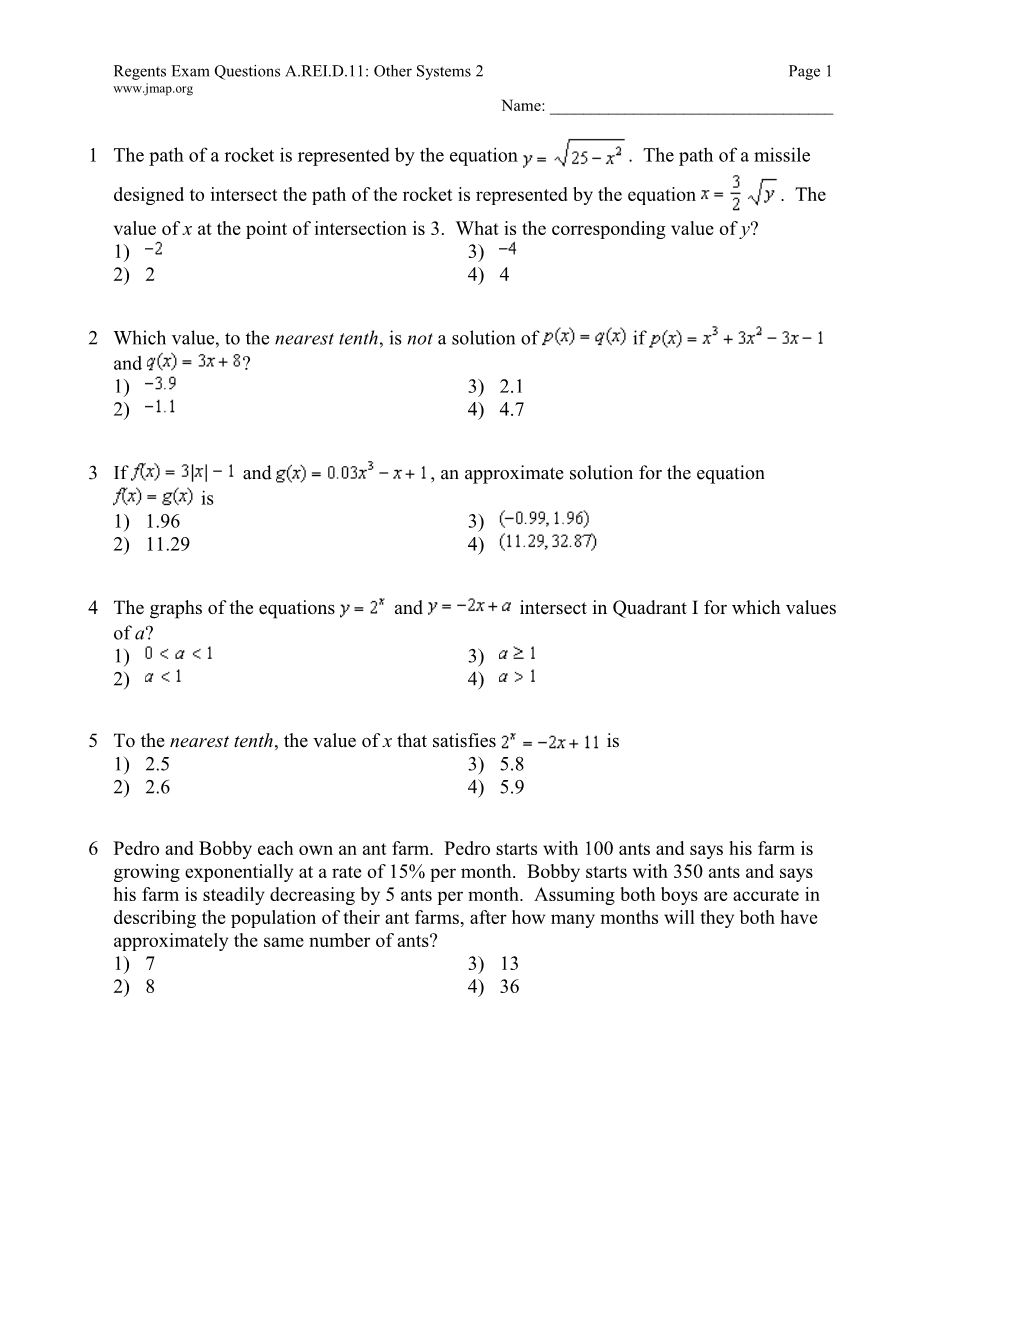 Regents Exam Questions A.REI.D.11: Other Systems 2Page 1